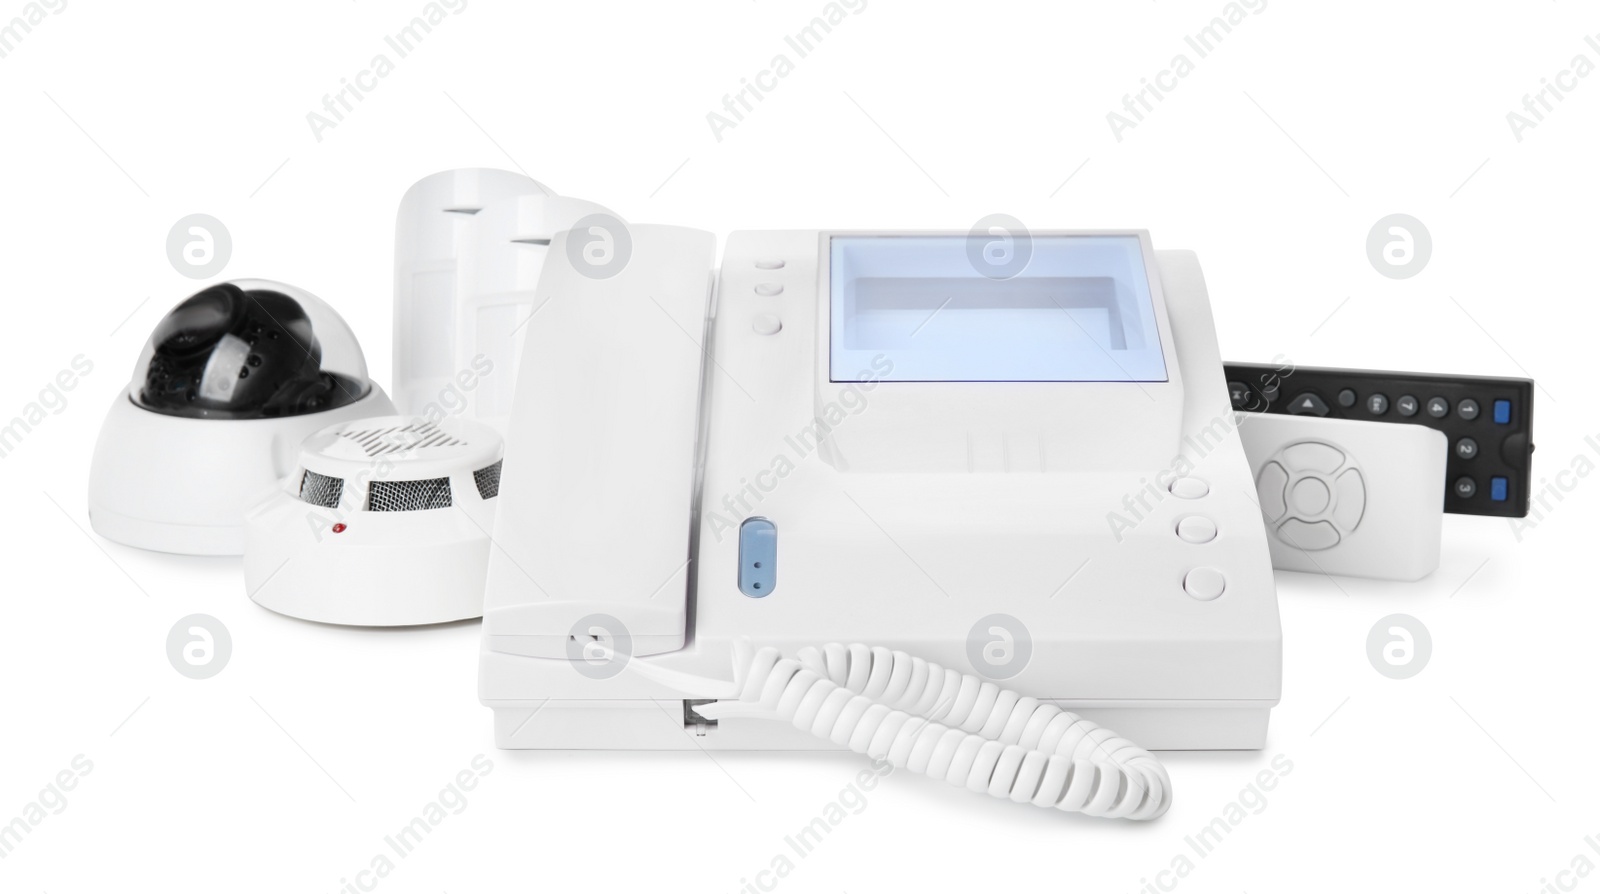 Photo of CCTV camera, remote controls, intercom, smoke and movement detectors on white background. Home security system